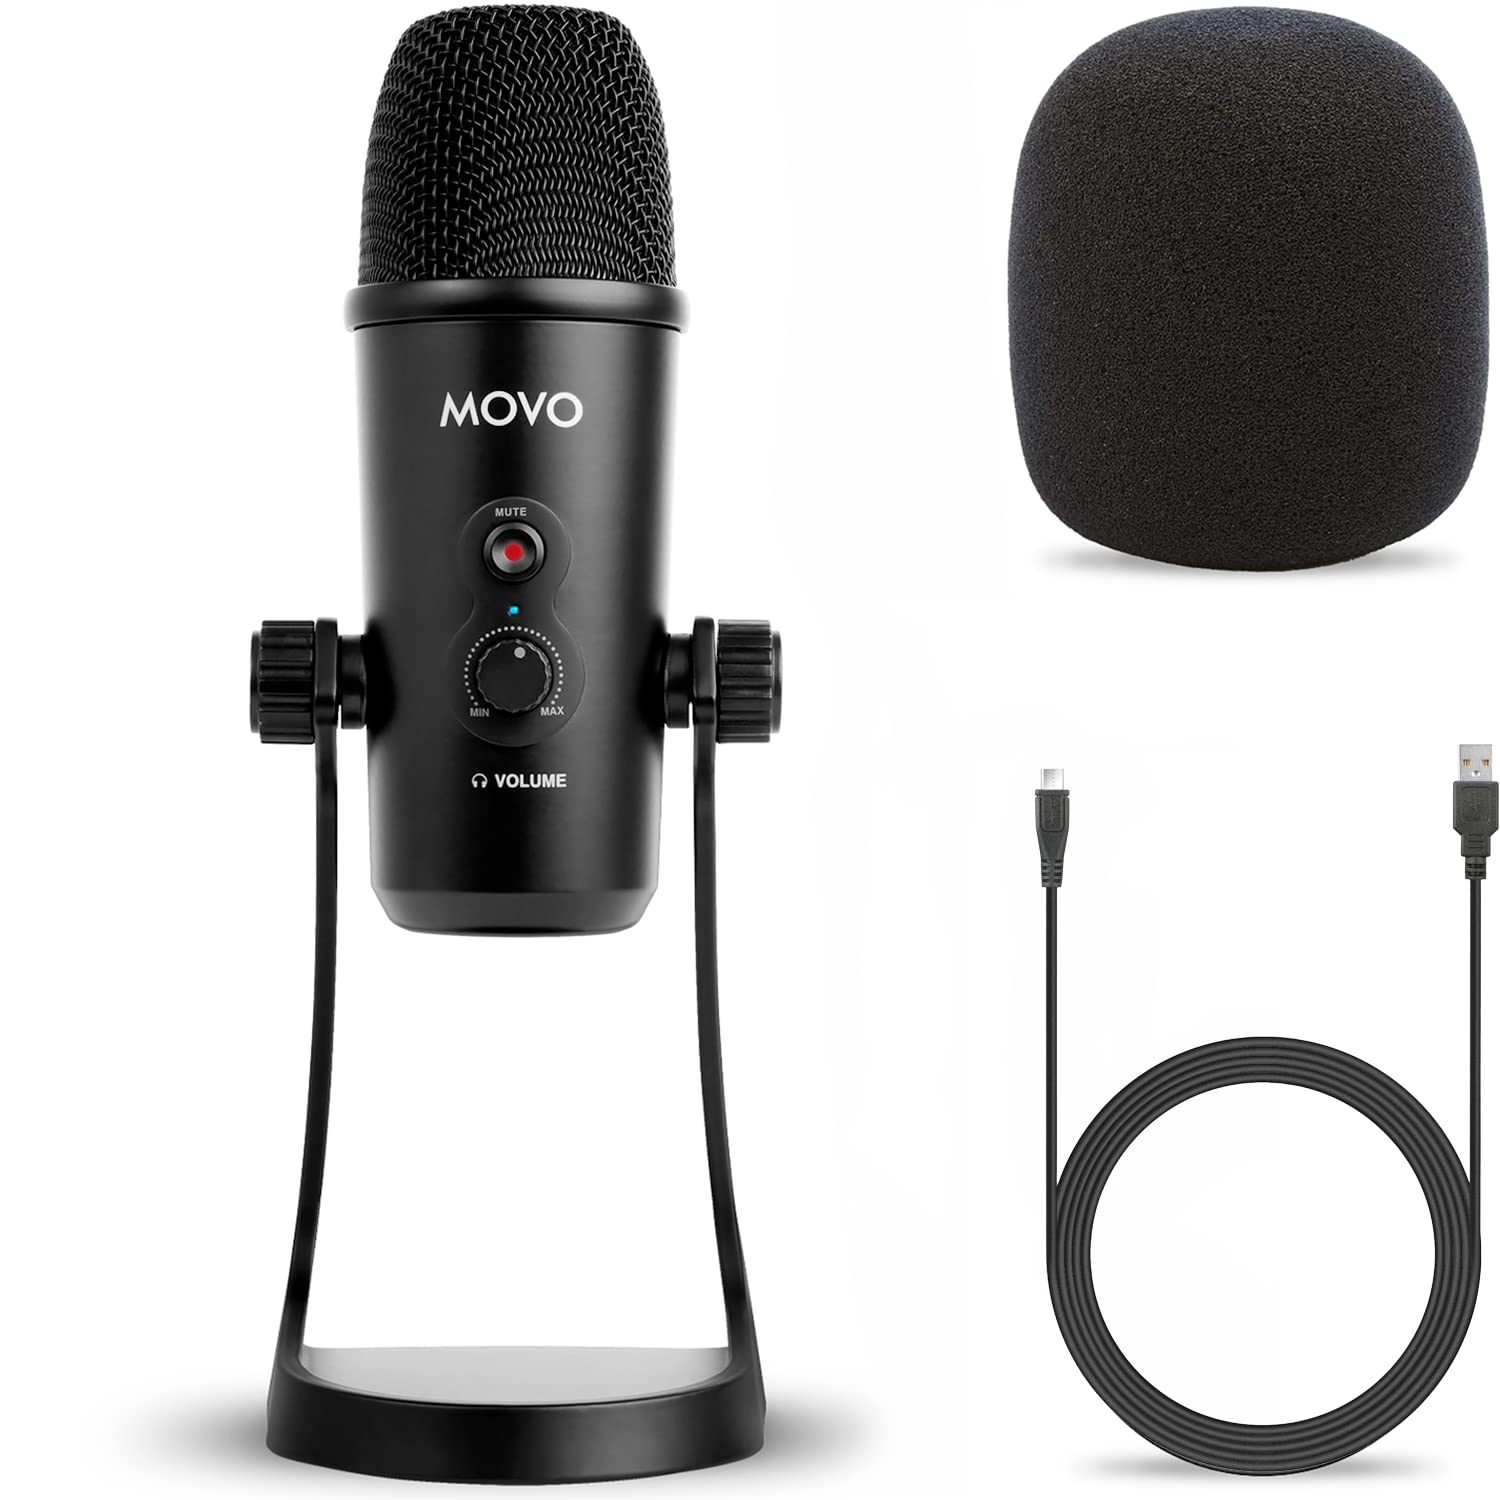 Movo UM700 Desktop USB Microphone for Computer with Adjustable Pickup Patterns  - Like New